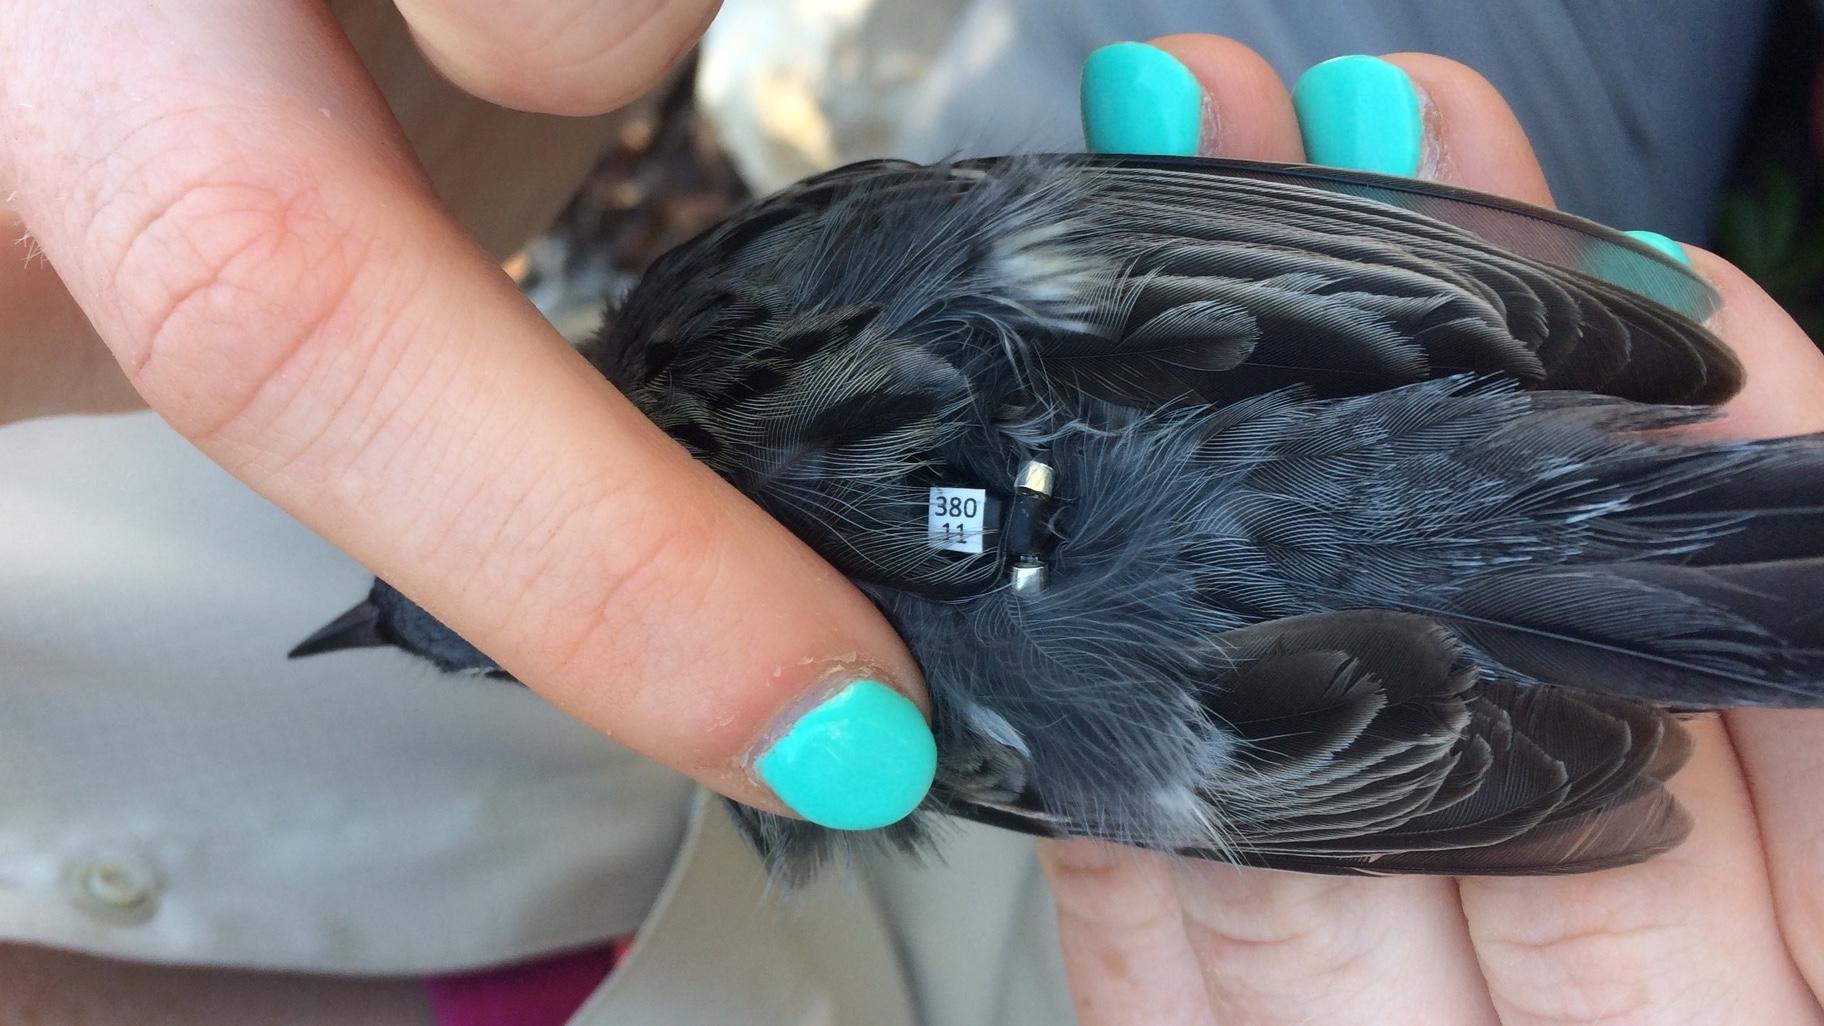 A warbler tagged with a tiny geolocator. (Courtesy of Heather Skeen)